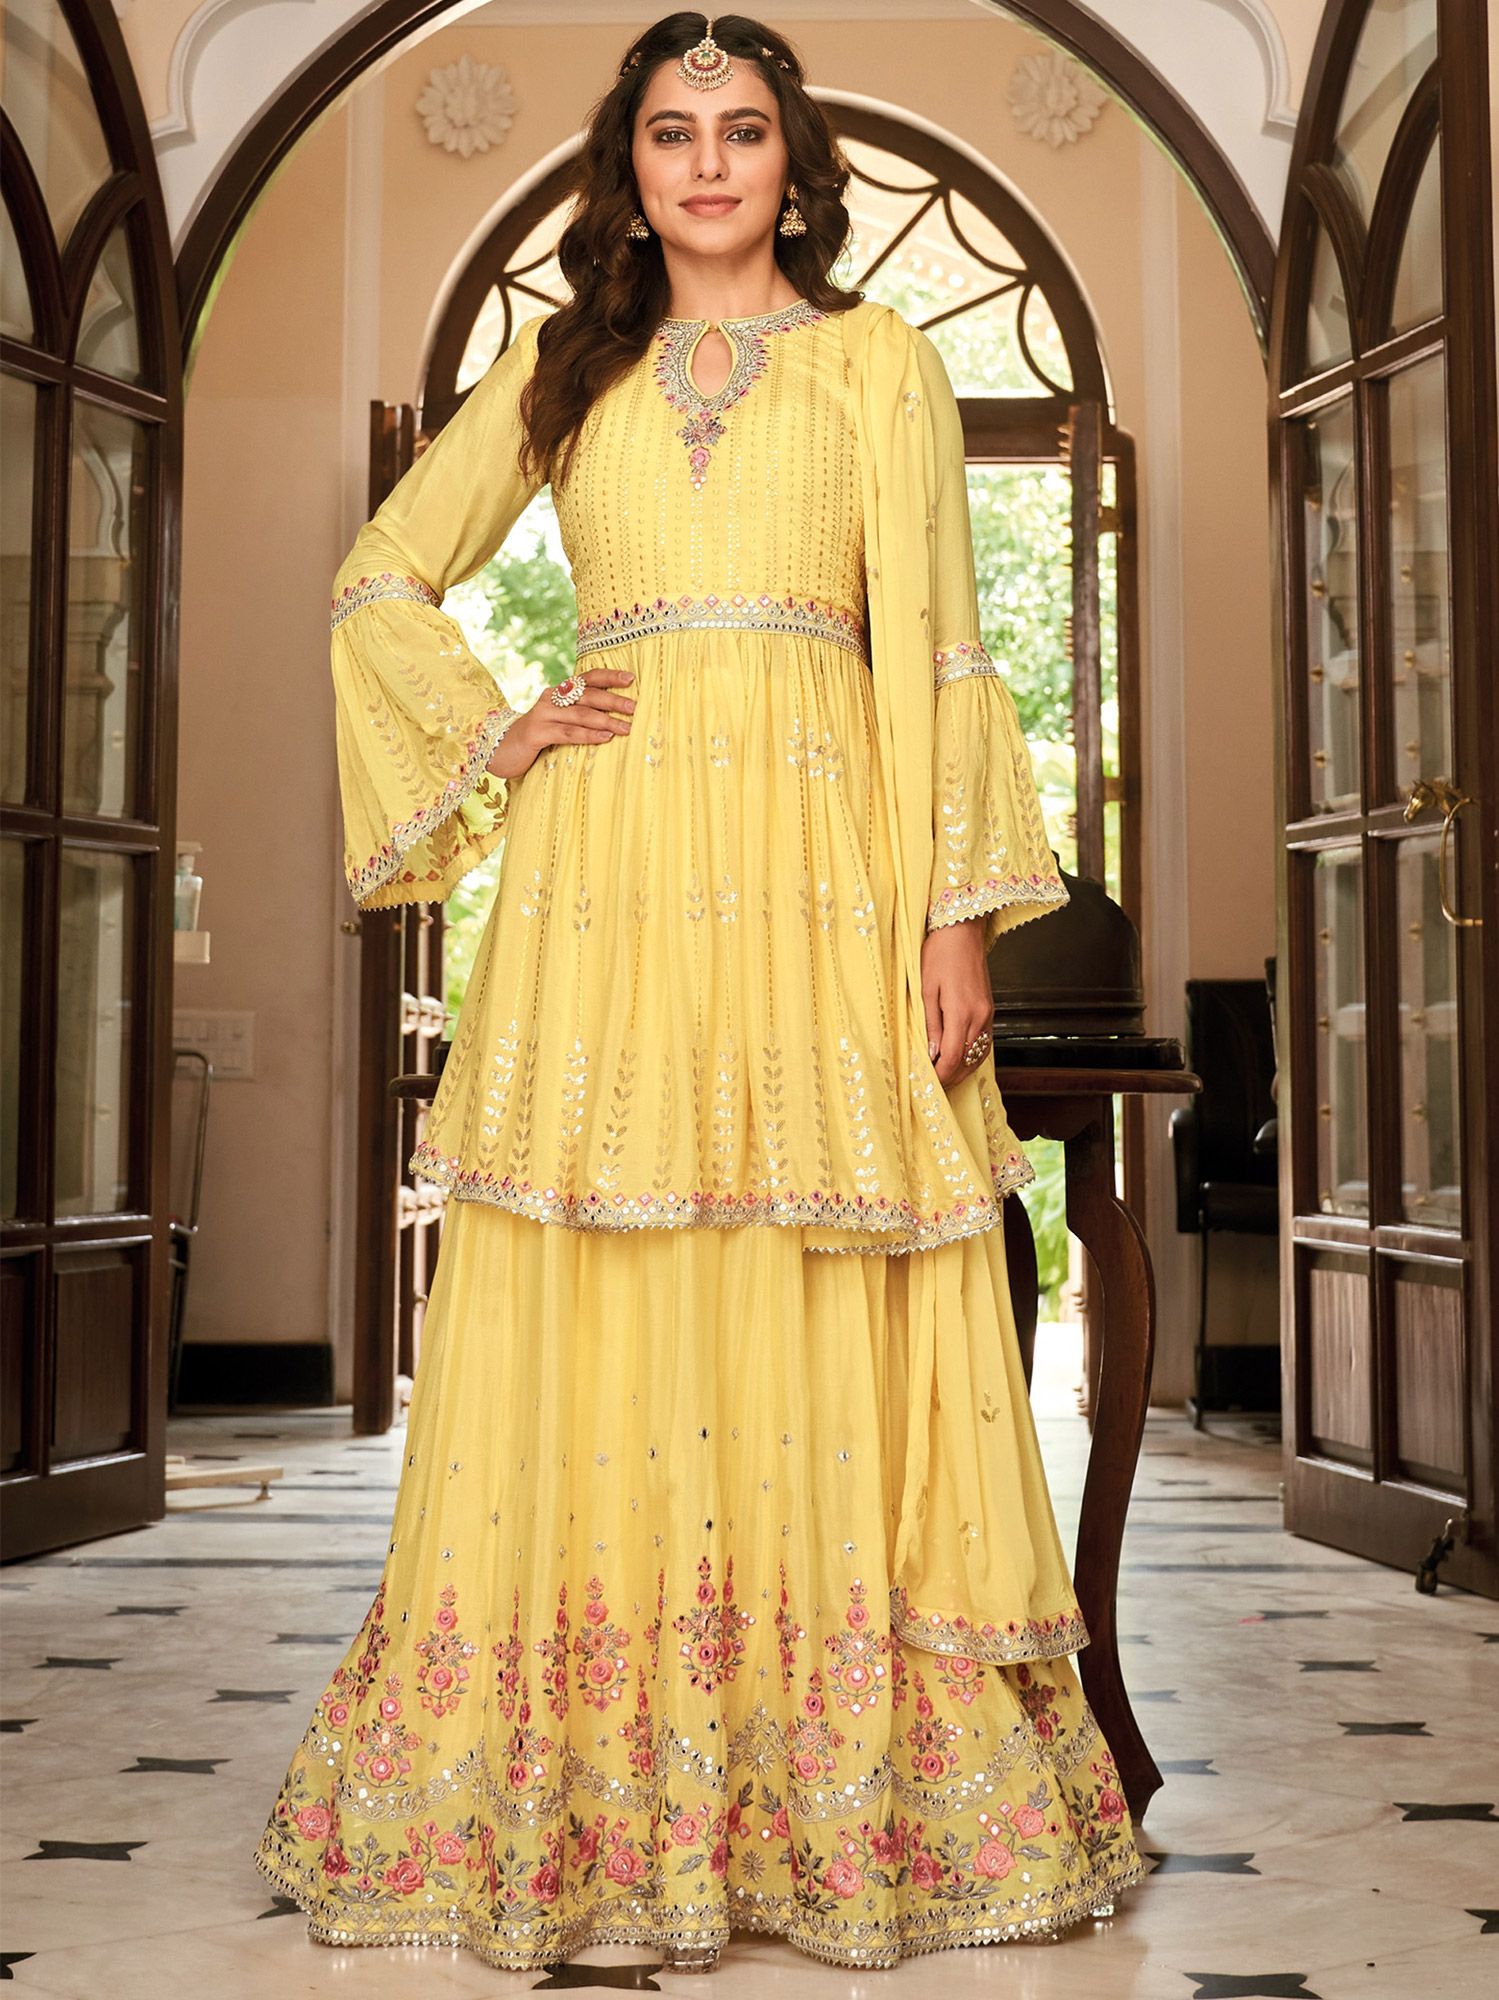 Organza Suits : Buy Organza Suits Online at the Best Price – Aachho